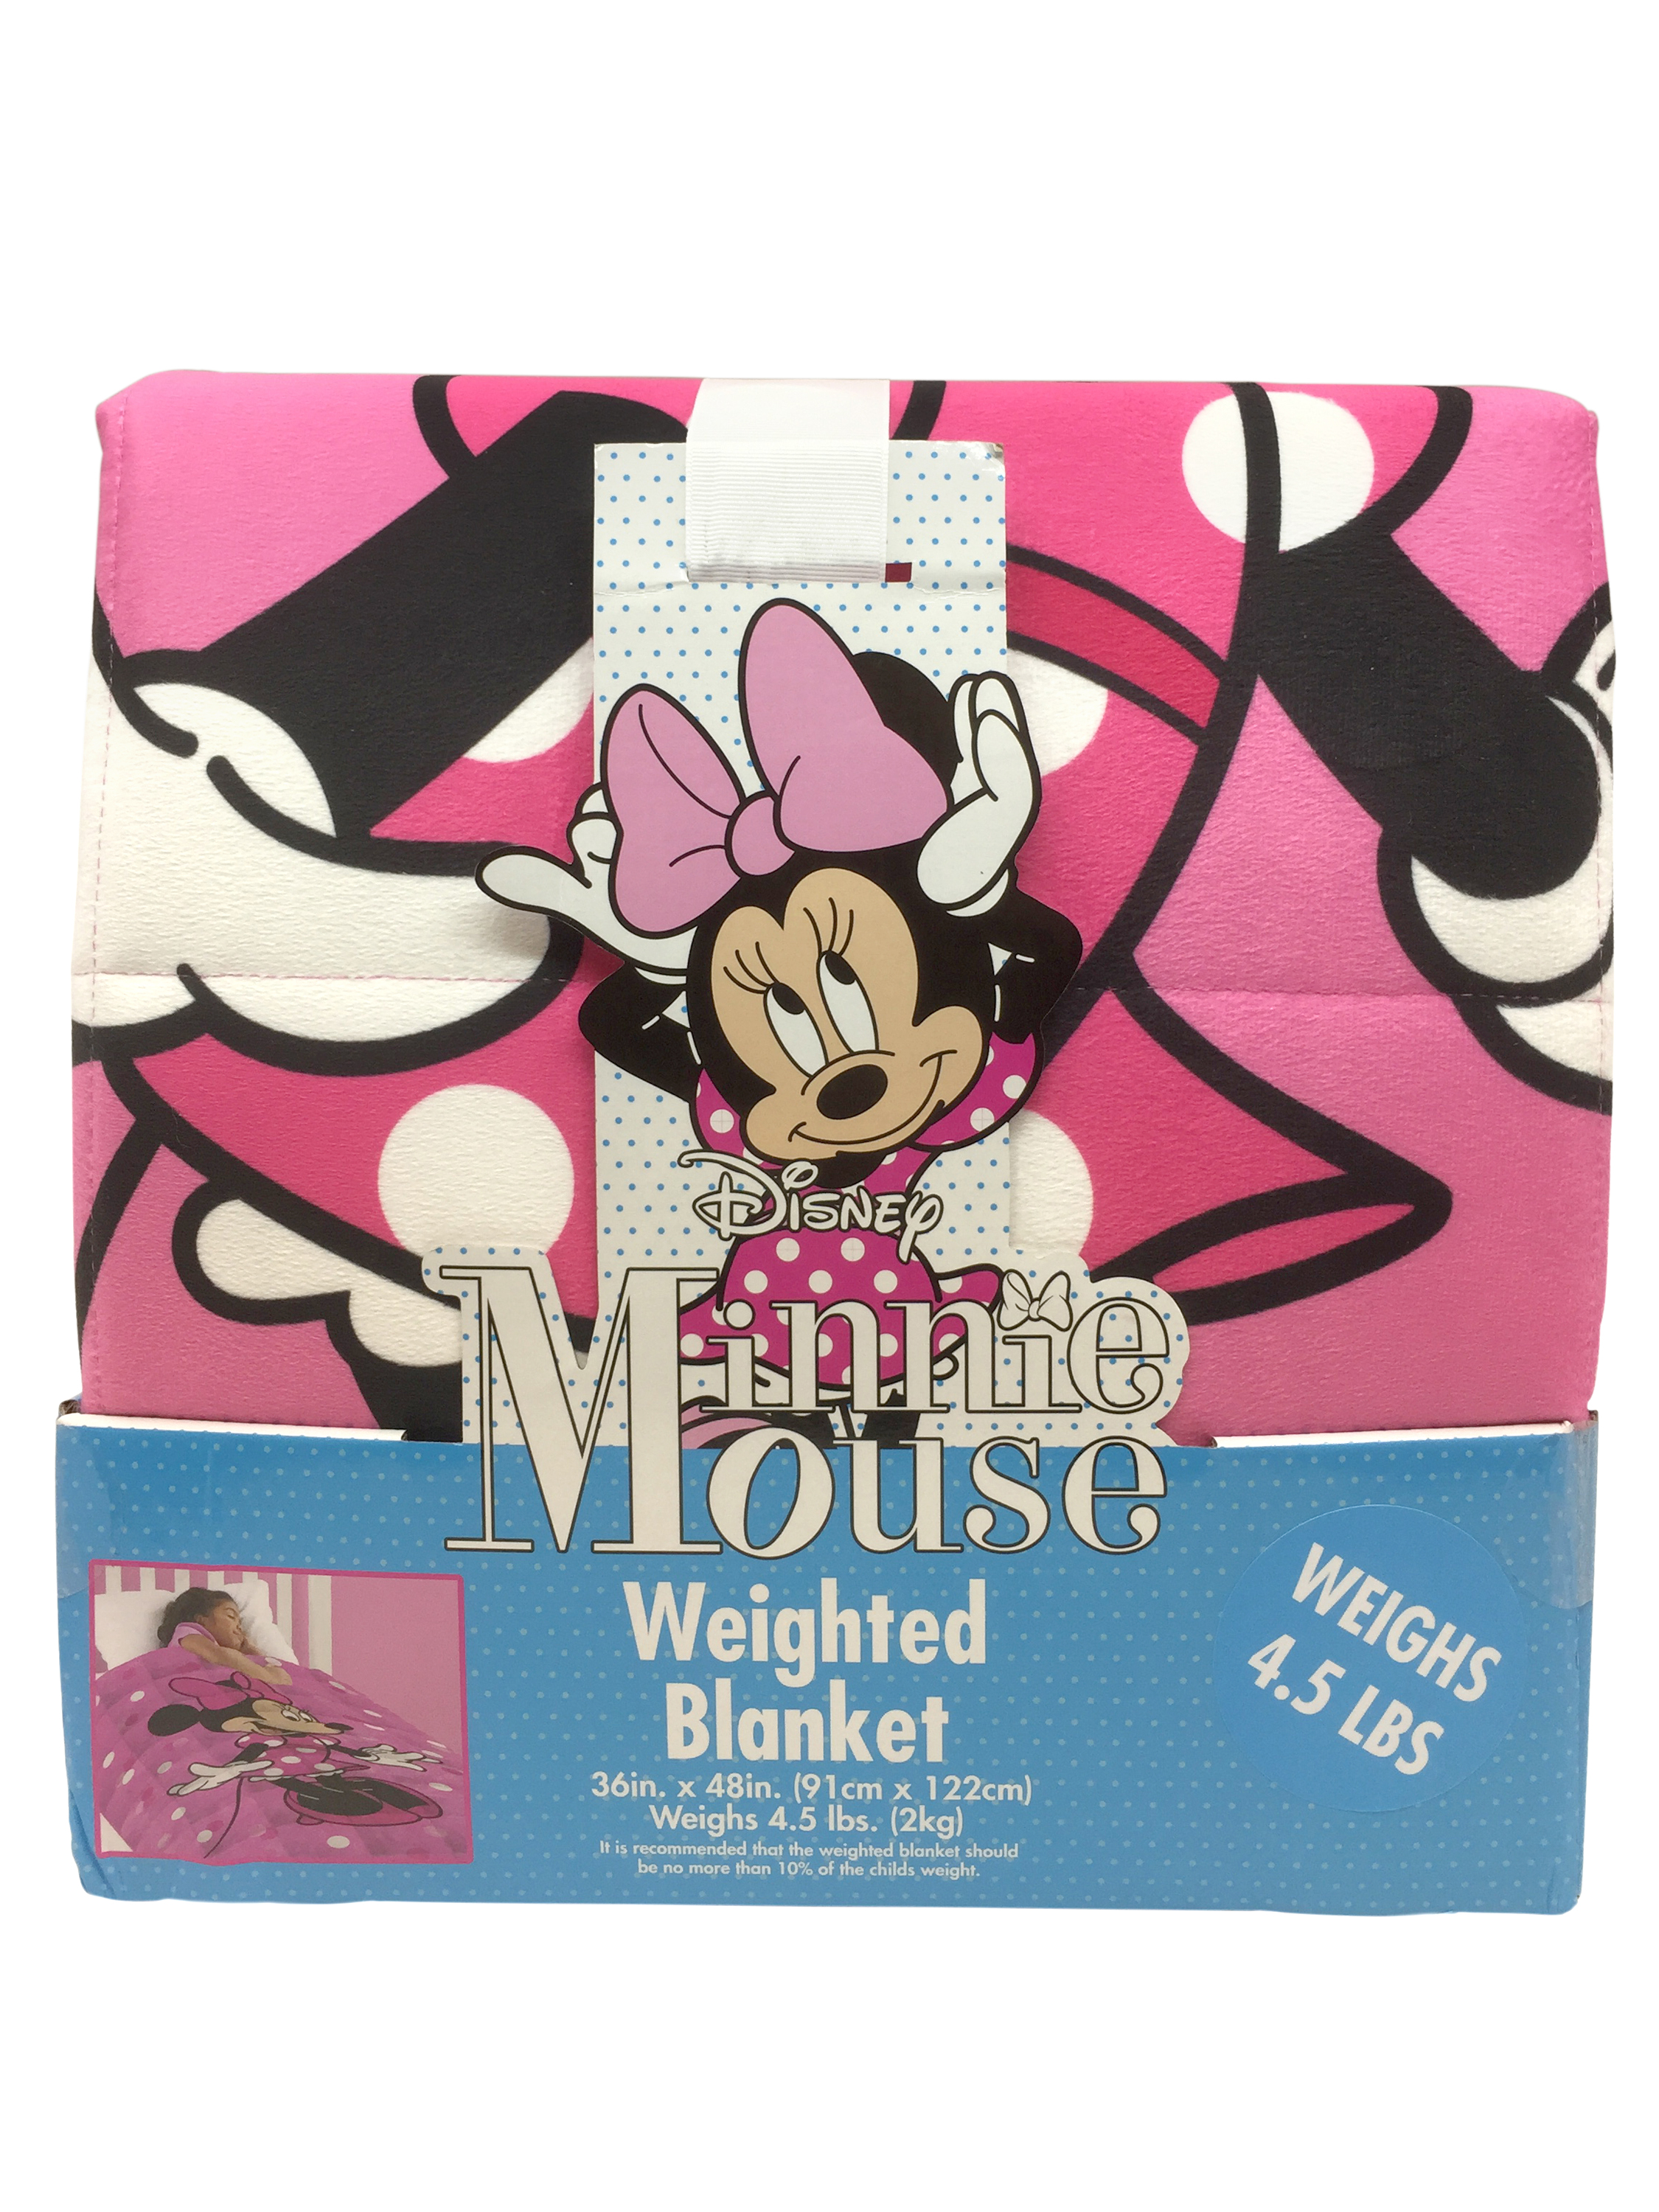 Disney Minnie Mouse 4.5 Pounds Weighted Blanket - image 3 of 3